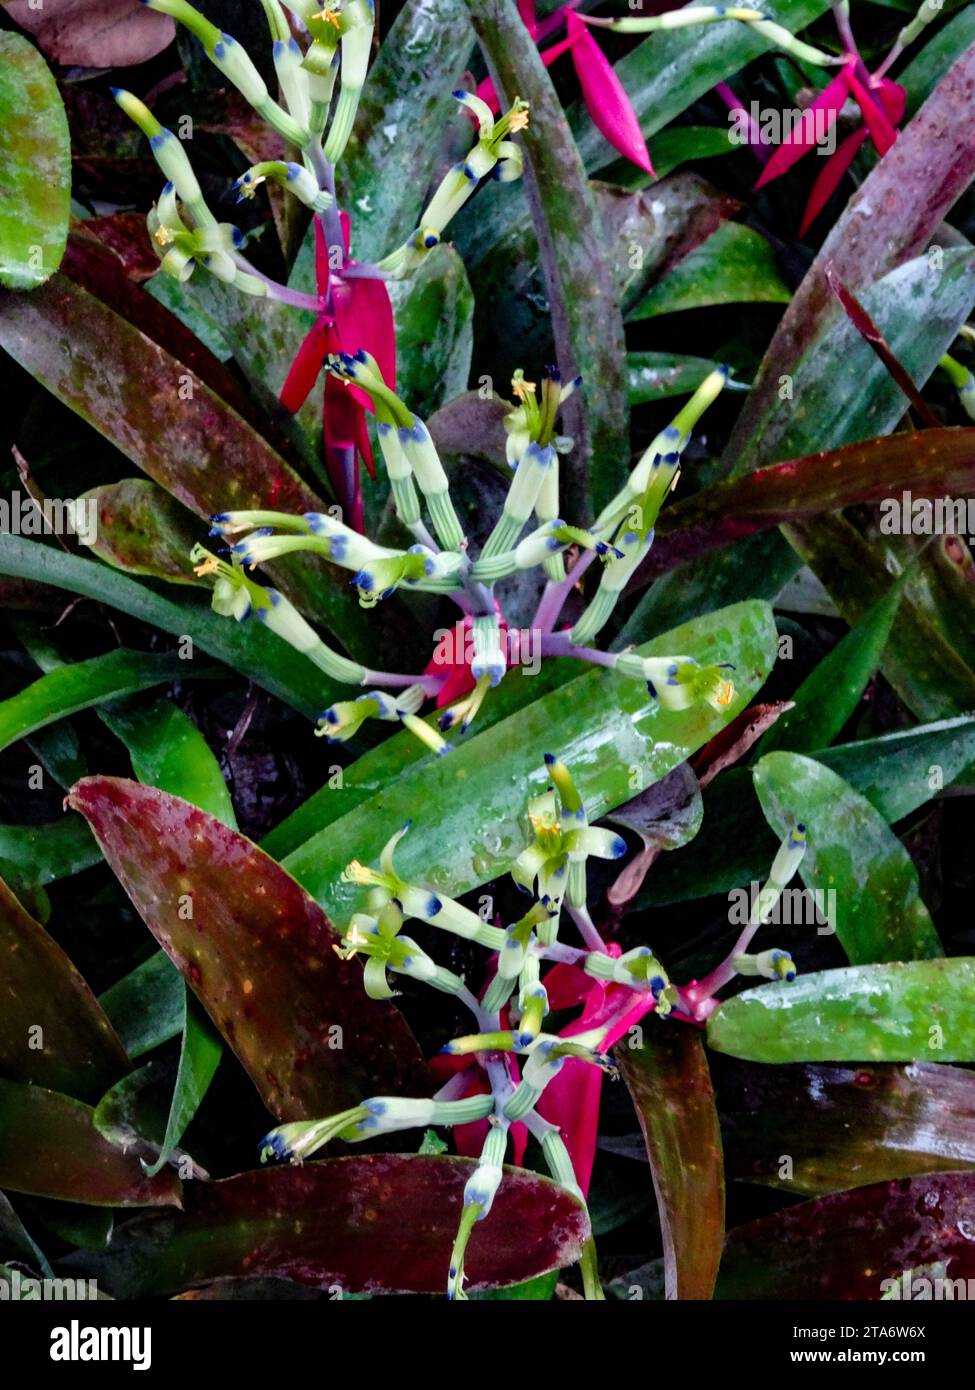 Chaotic natural close up environmental flowering plant portrait of Billbergia Amoena,flowering on mass Stock Photo